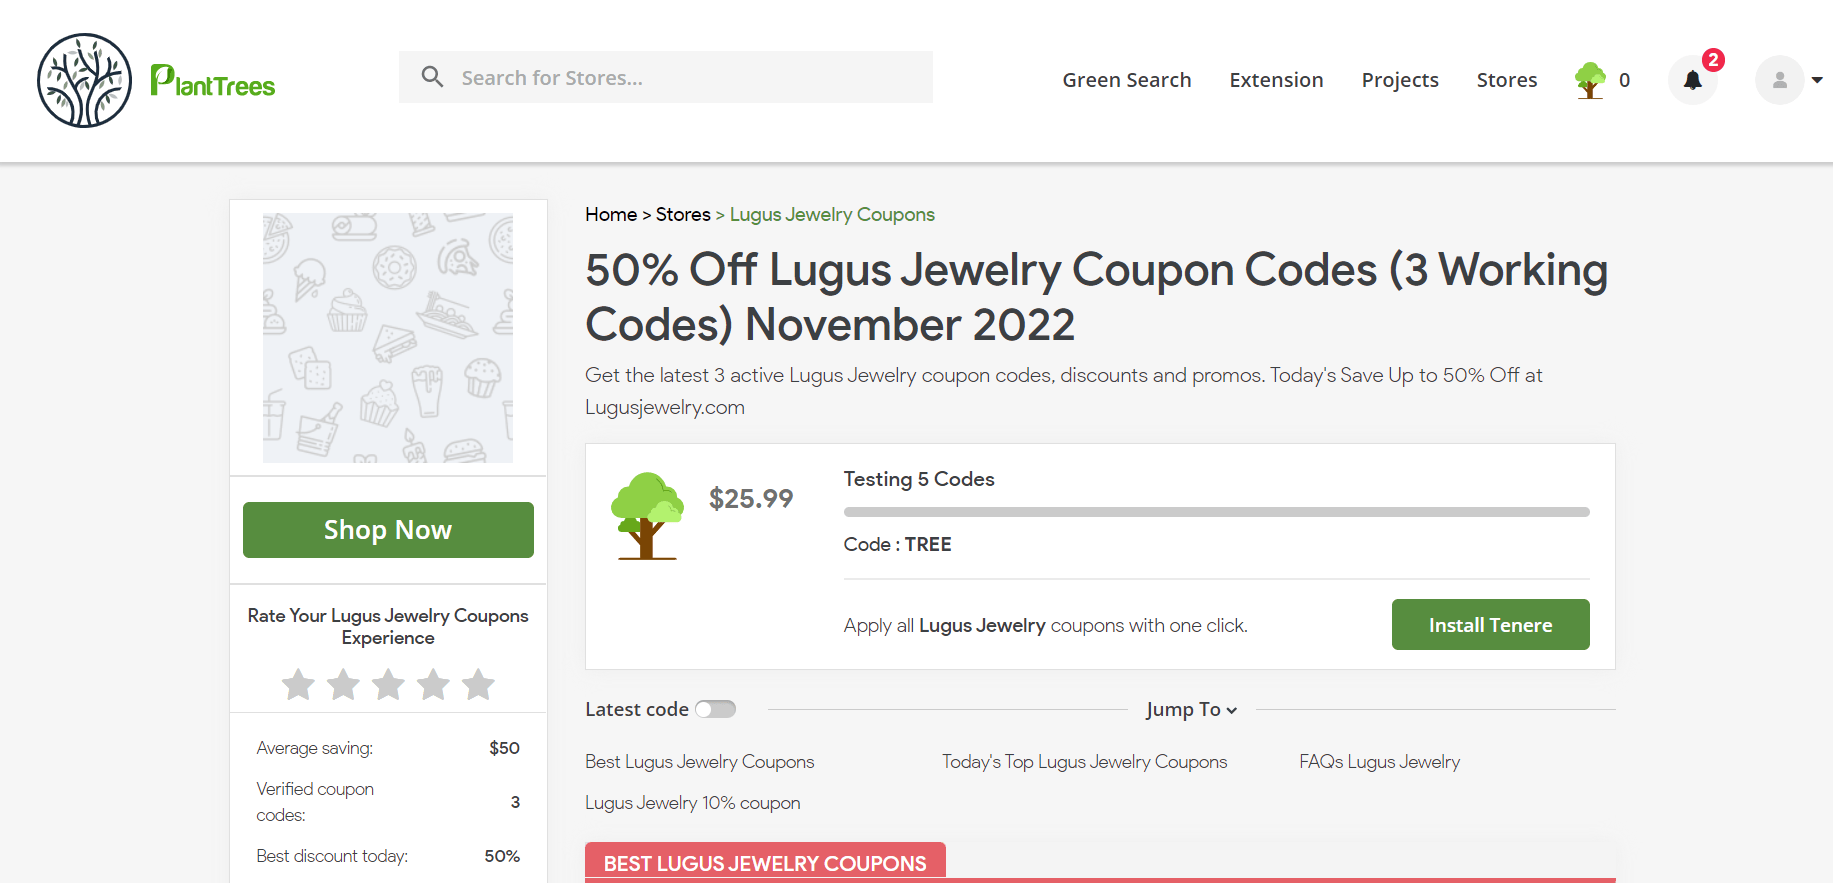 How to use Lugus Jewelry coupon 2